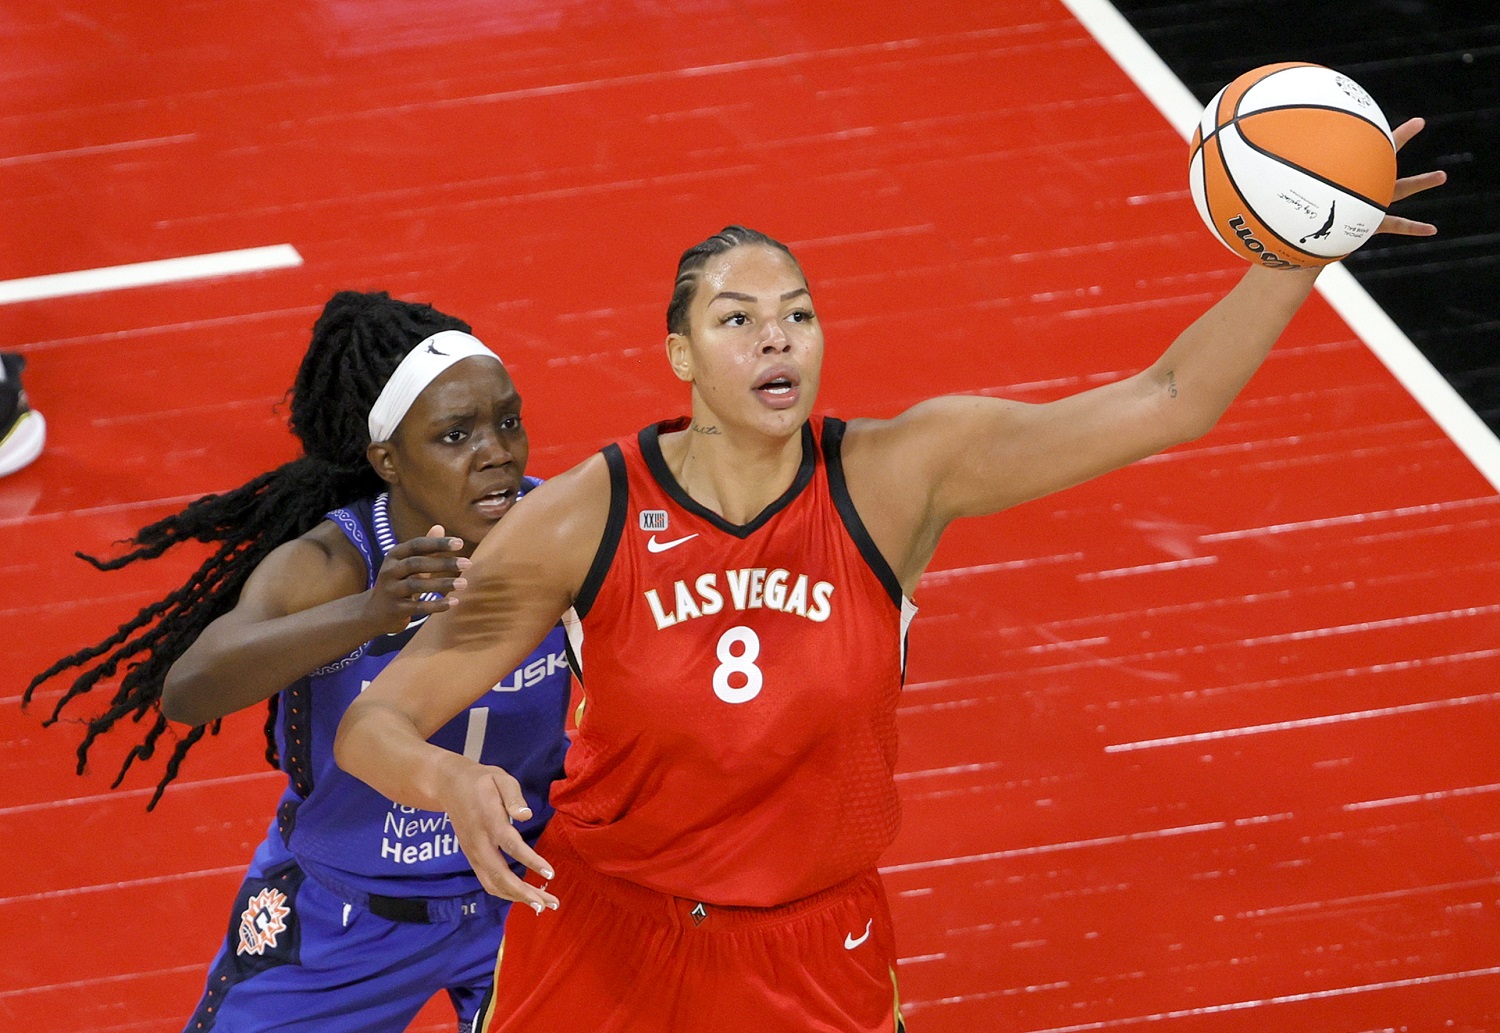 Liz Cambage of the Las Vegas Aces catches a pass under pressure from Beatrice Mompremier of the Connecticut Sun during their game on May 23, 2021 in Las Vegas. | Ethan Miller/Getty Images